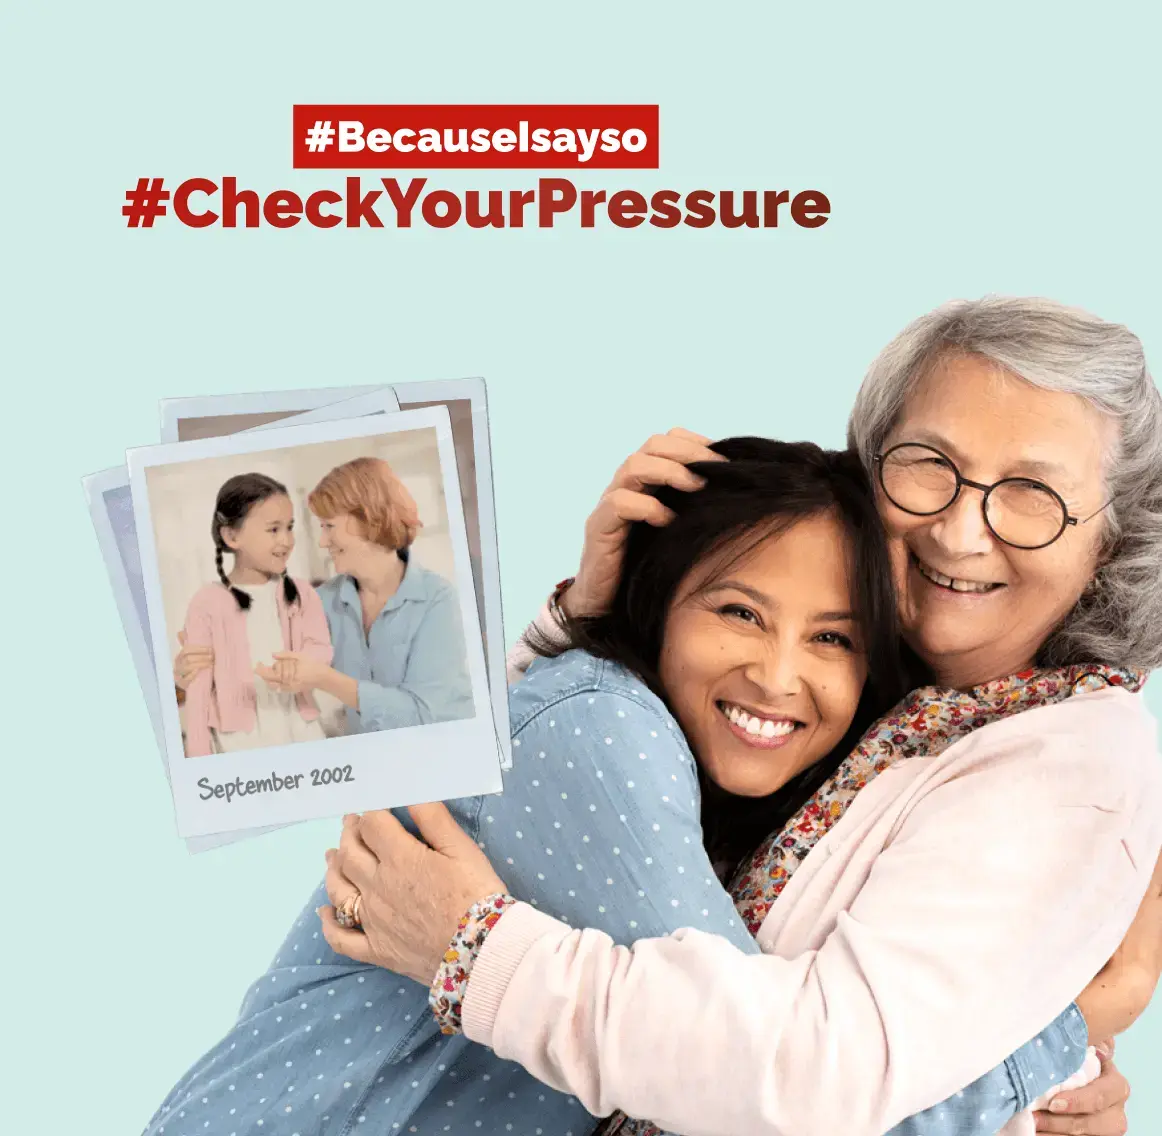 Awareness campaign #BecauseIsayso #CheckYourPressure